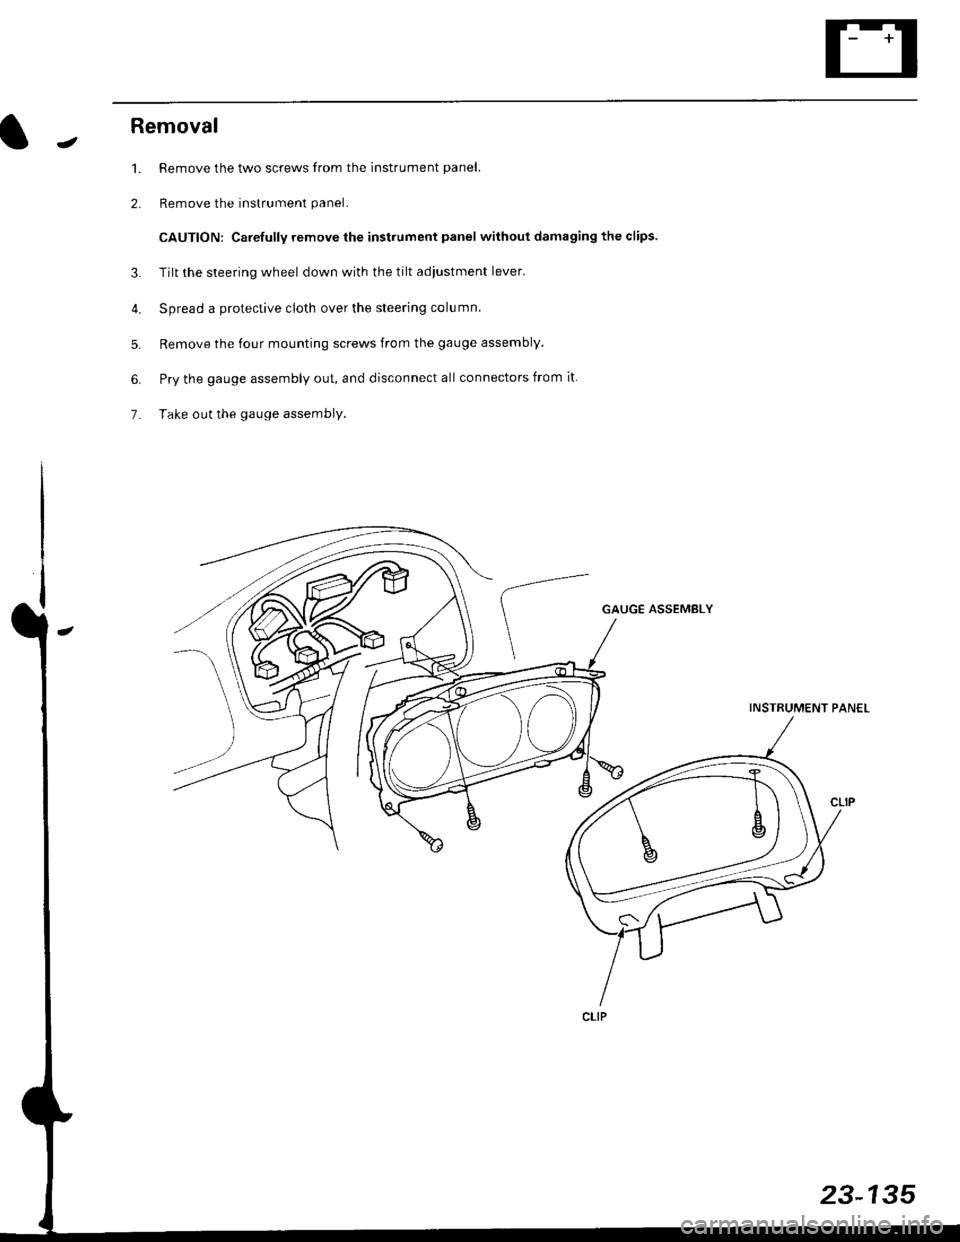 HONDA CIVIC 2000 6.G Workshop Manual JRemoval
1. Remove the two screws from the instrument panel.
2. Remove the instrument panel.
CAUTION: Carefully remove the instrument panel without damaging the clips.
3. Tilt the steering wheel down 